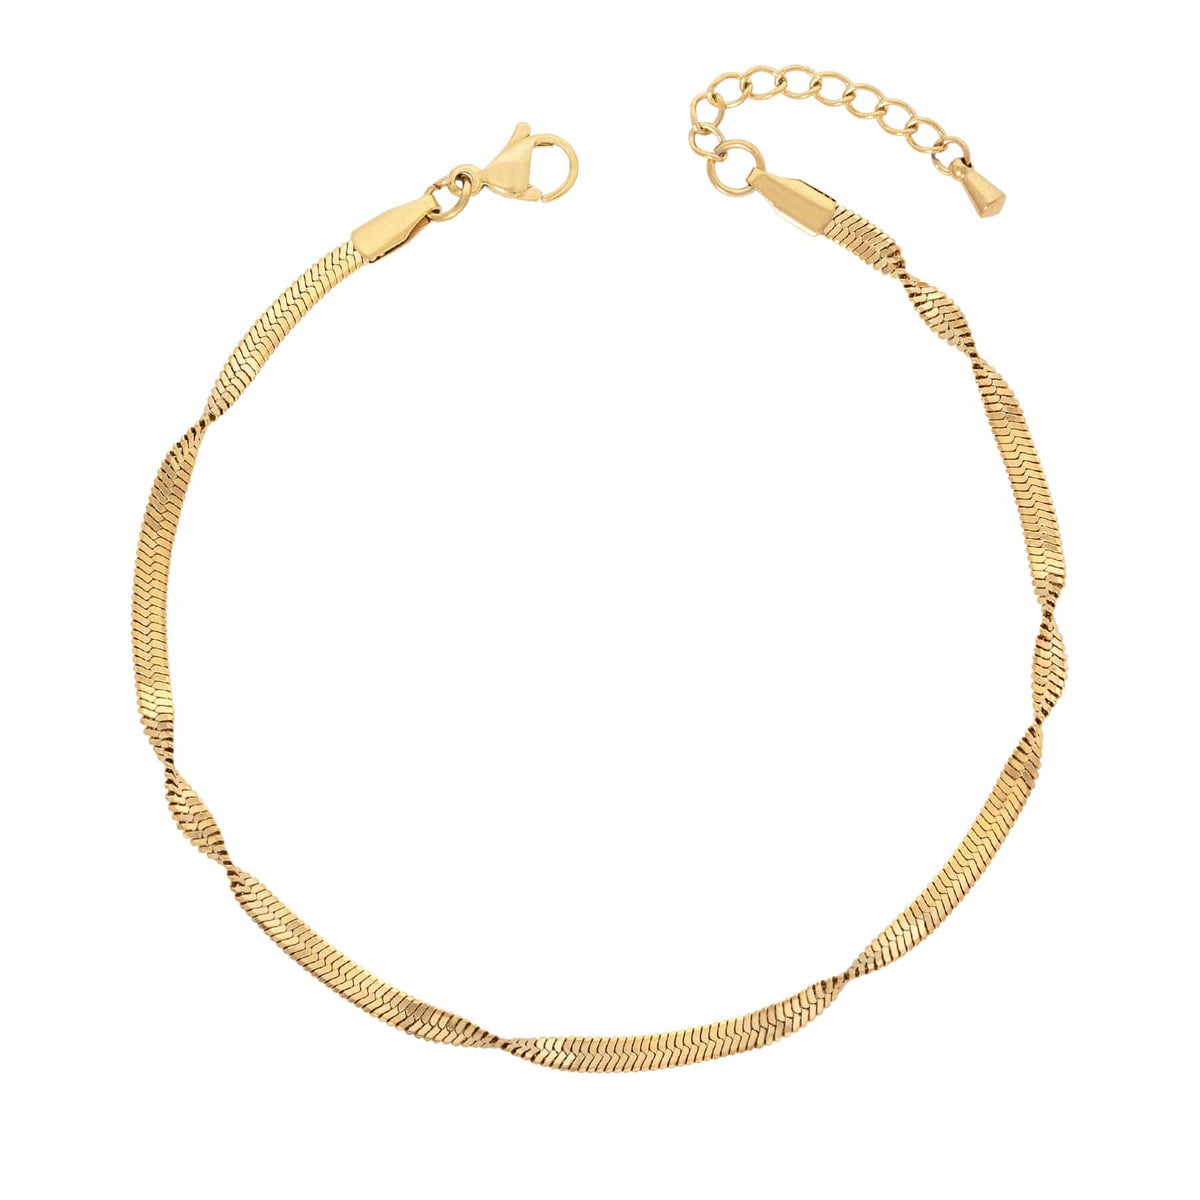 BohoMoon Stainless Steel Twist Anklet Gold